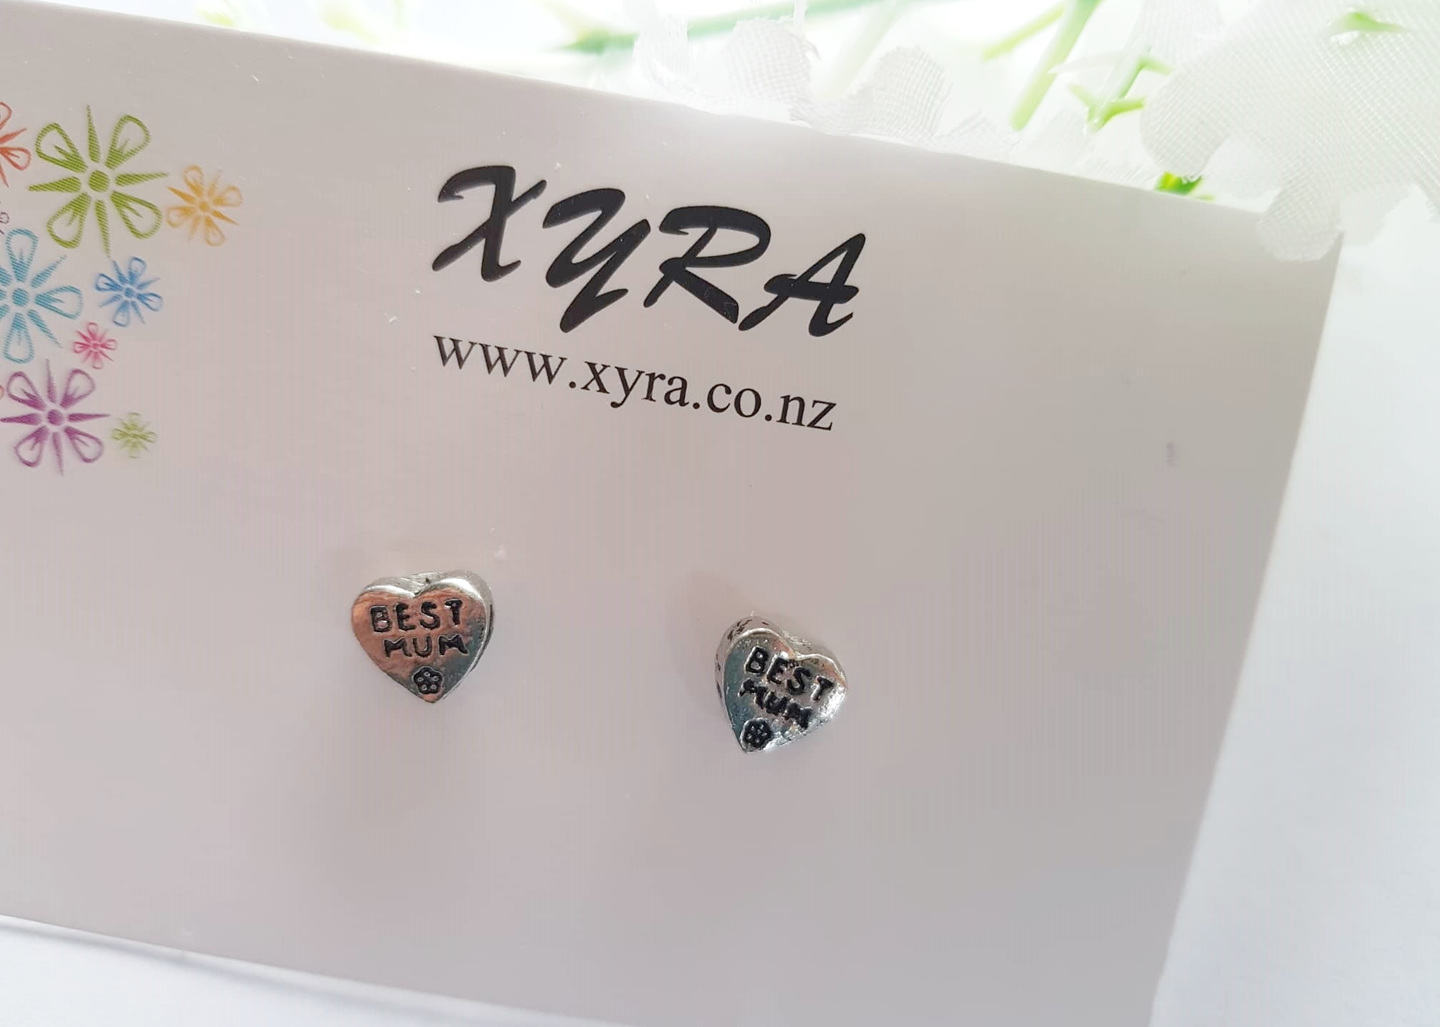 New in XYRA - BEST MUM STUDS in limited quantities only